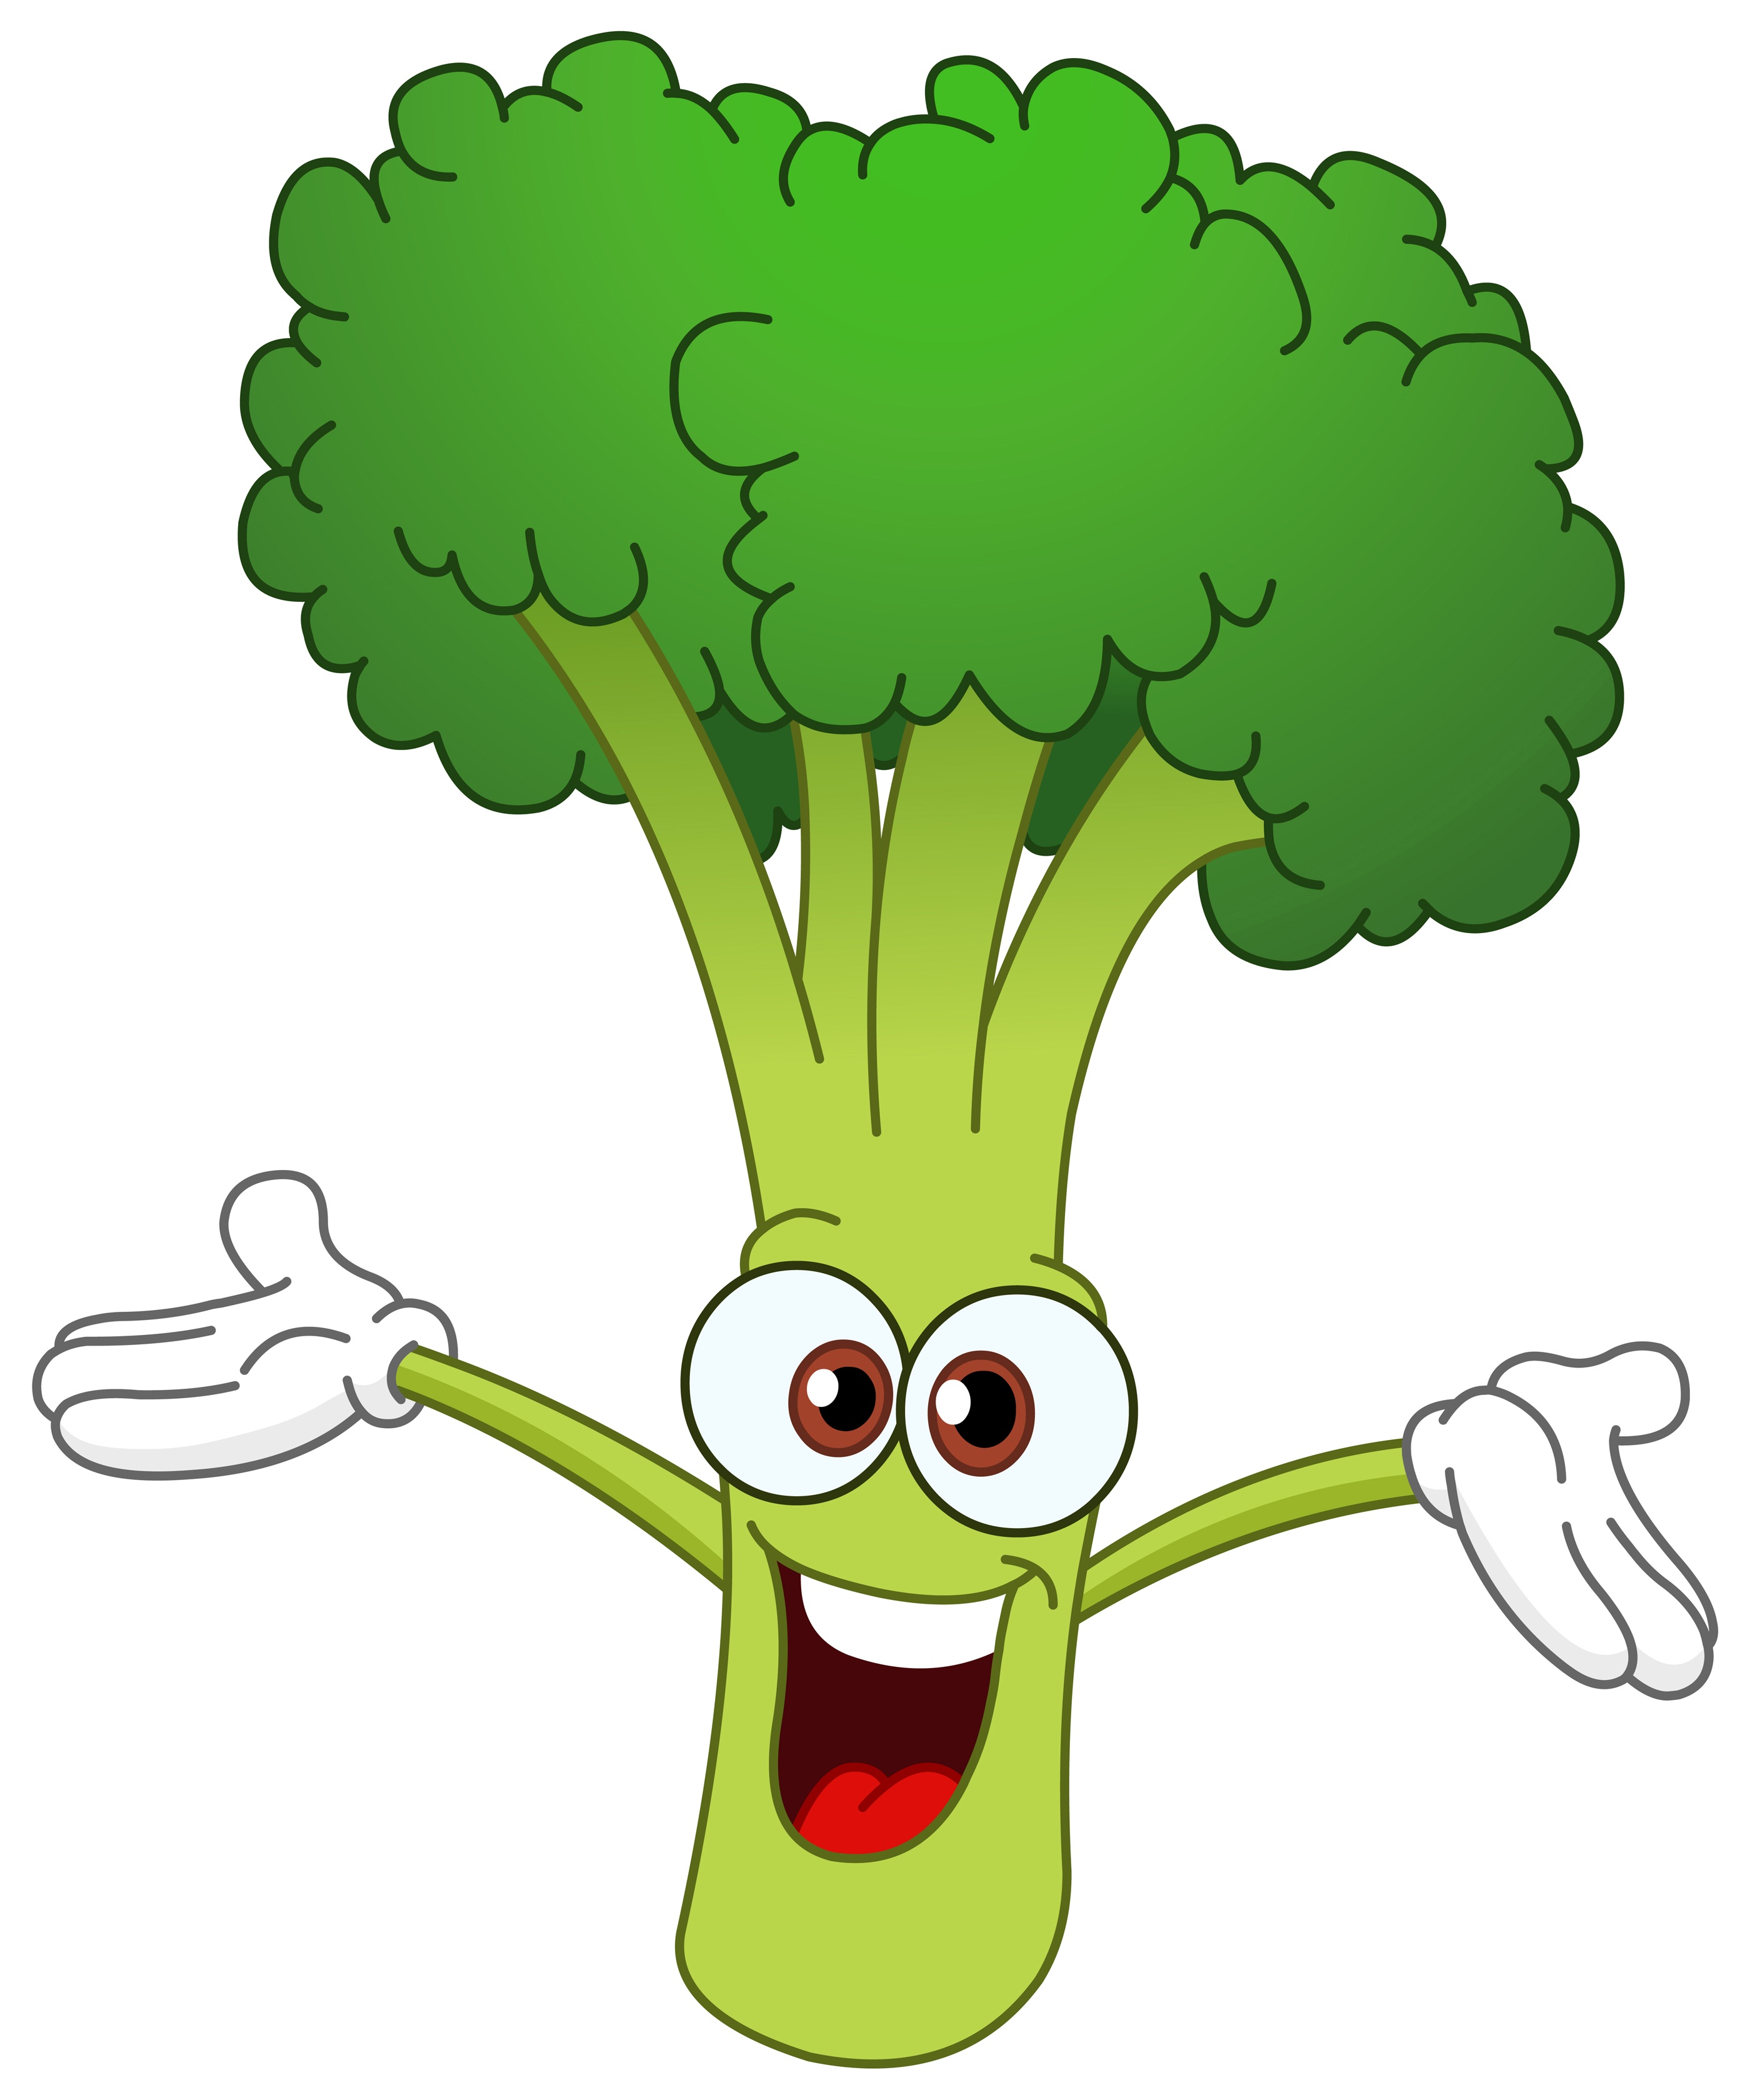 Broccoli clipart talking. Ignite your childs love